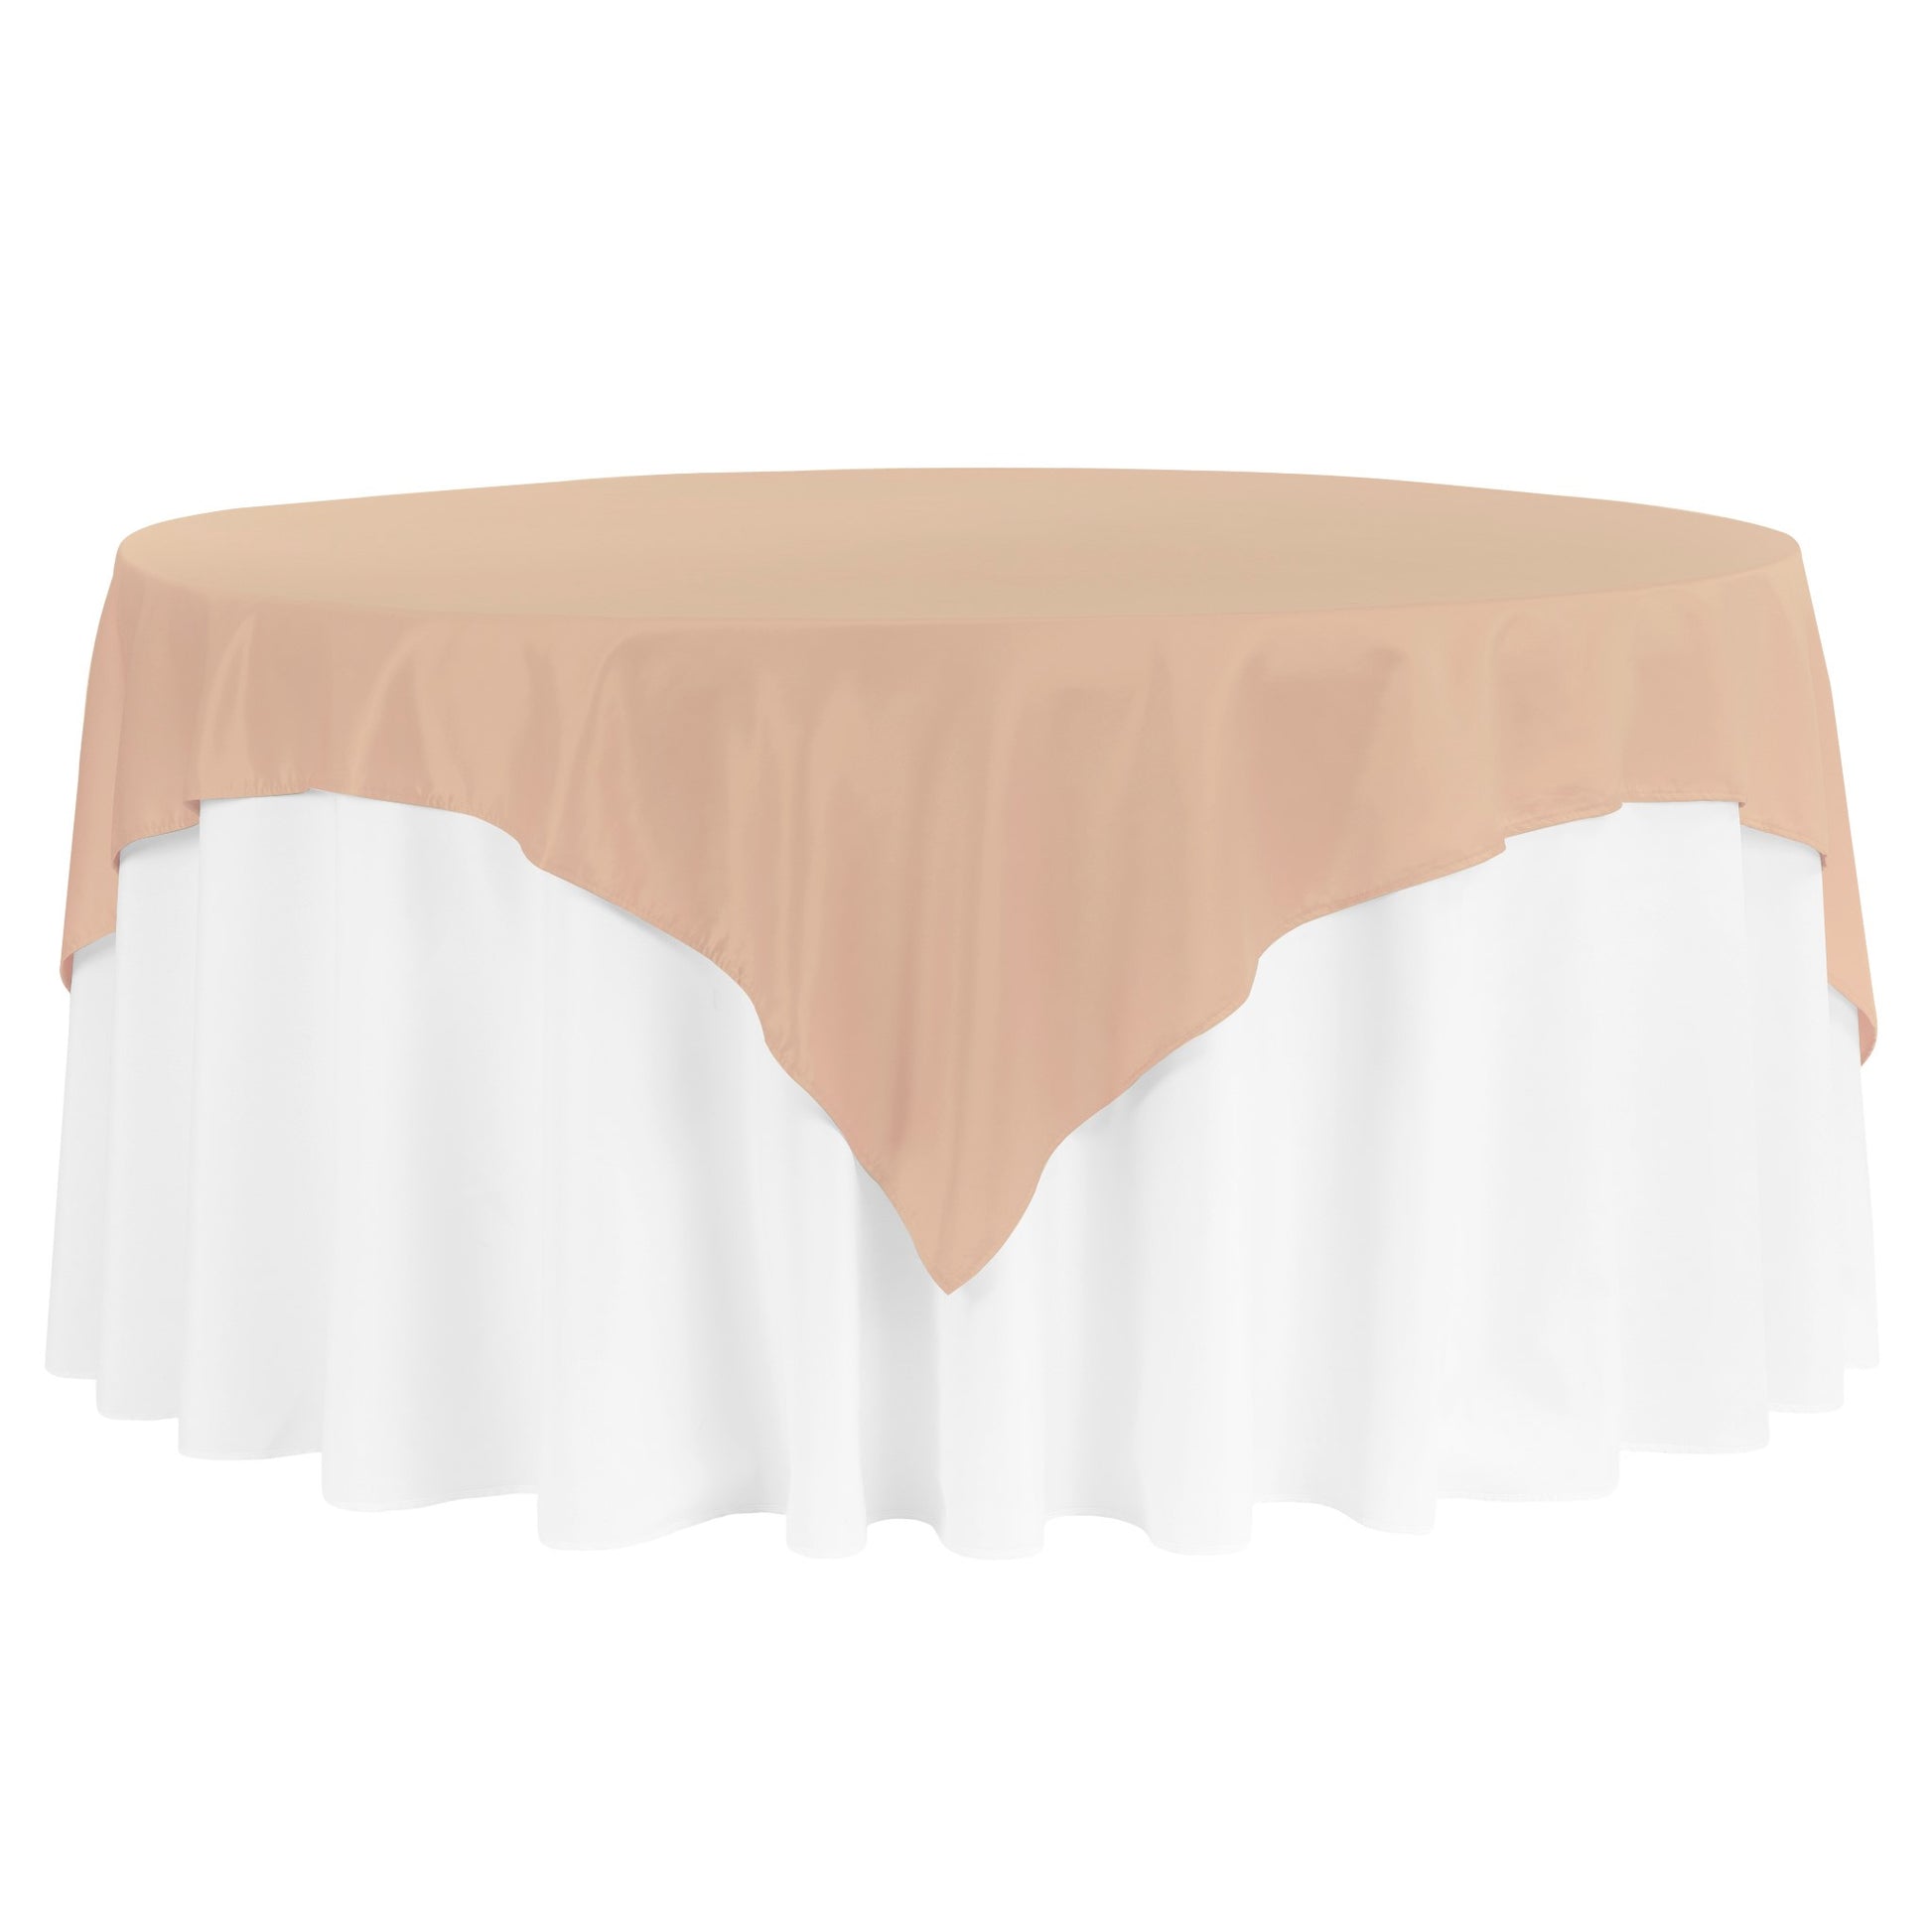 Square 72" Lamour Satin Table Overlay - Champagne